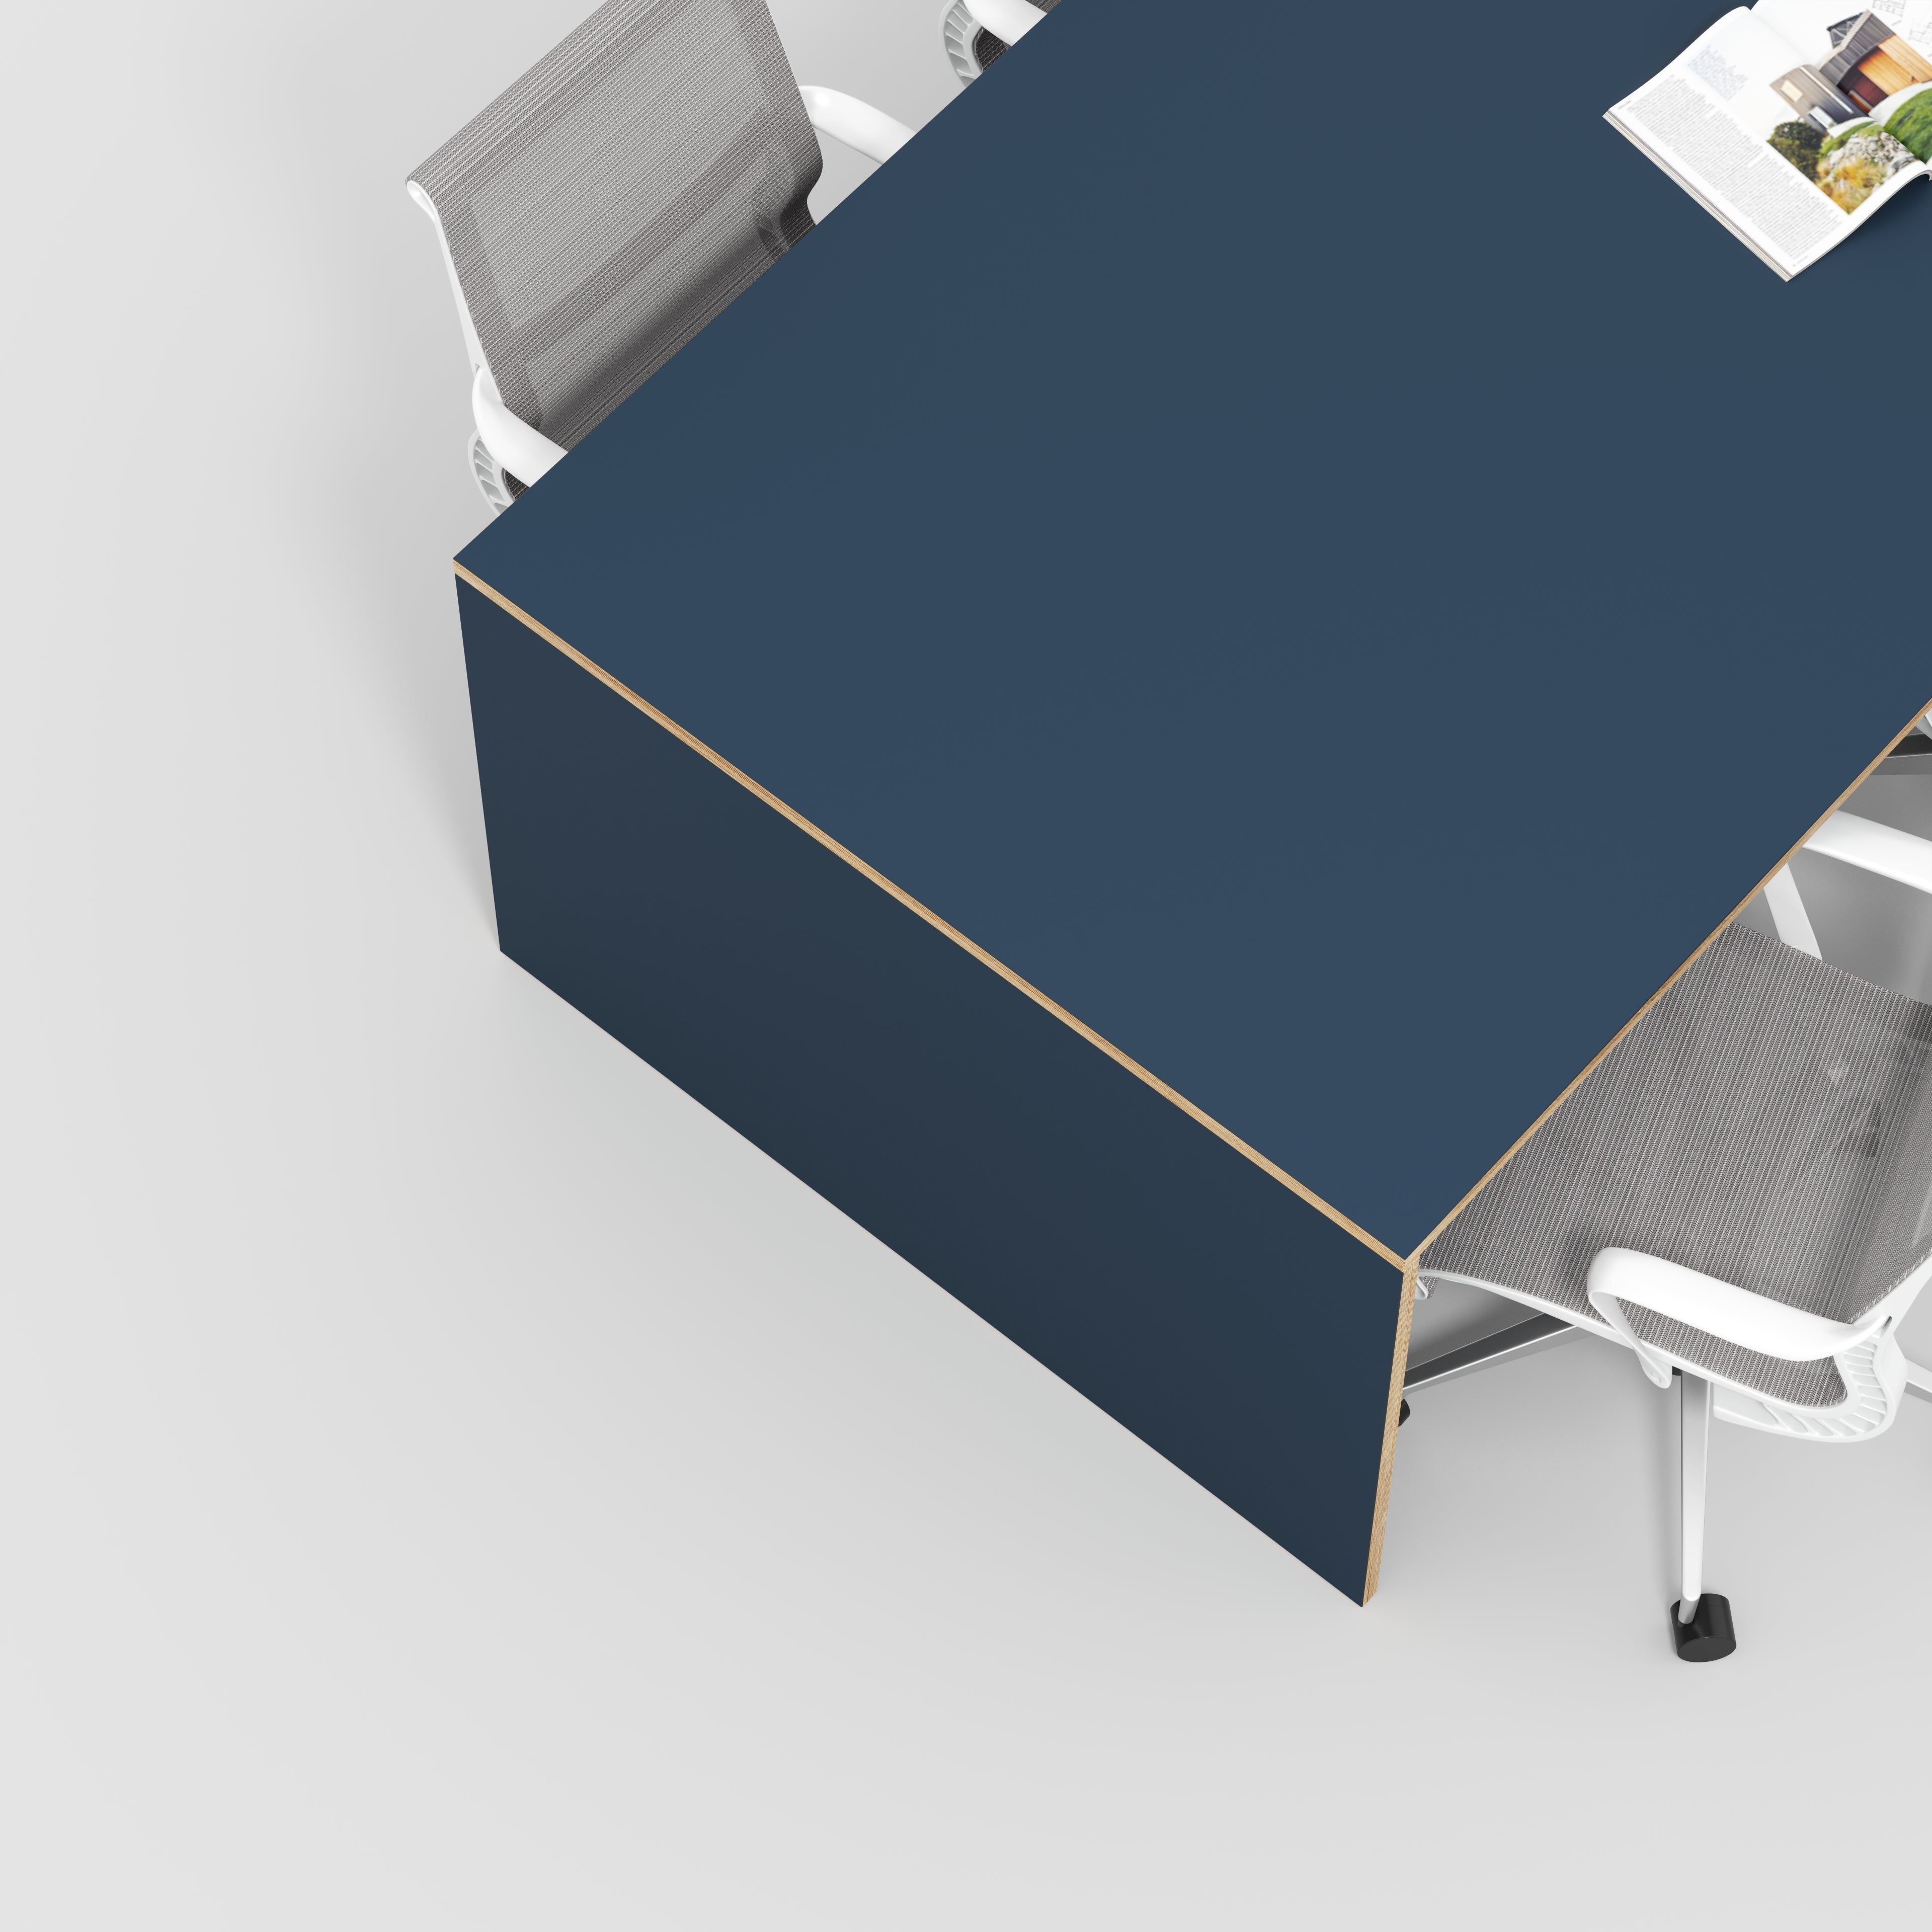 Table with Solid Sides - Formica Night Sea Blue - 5600(w) x 1000(d) x 750(h)